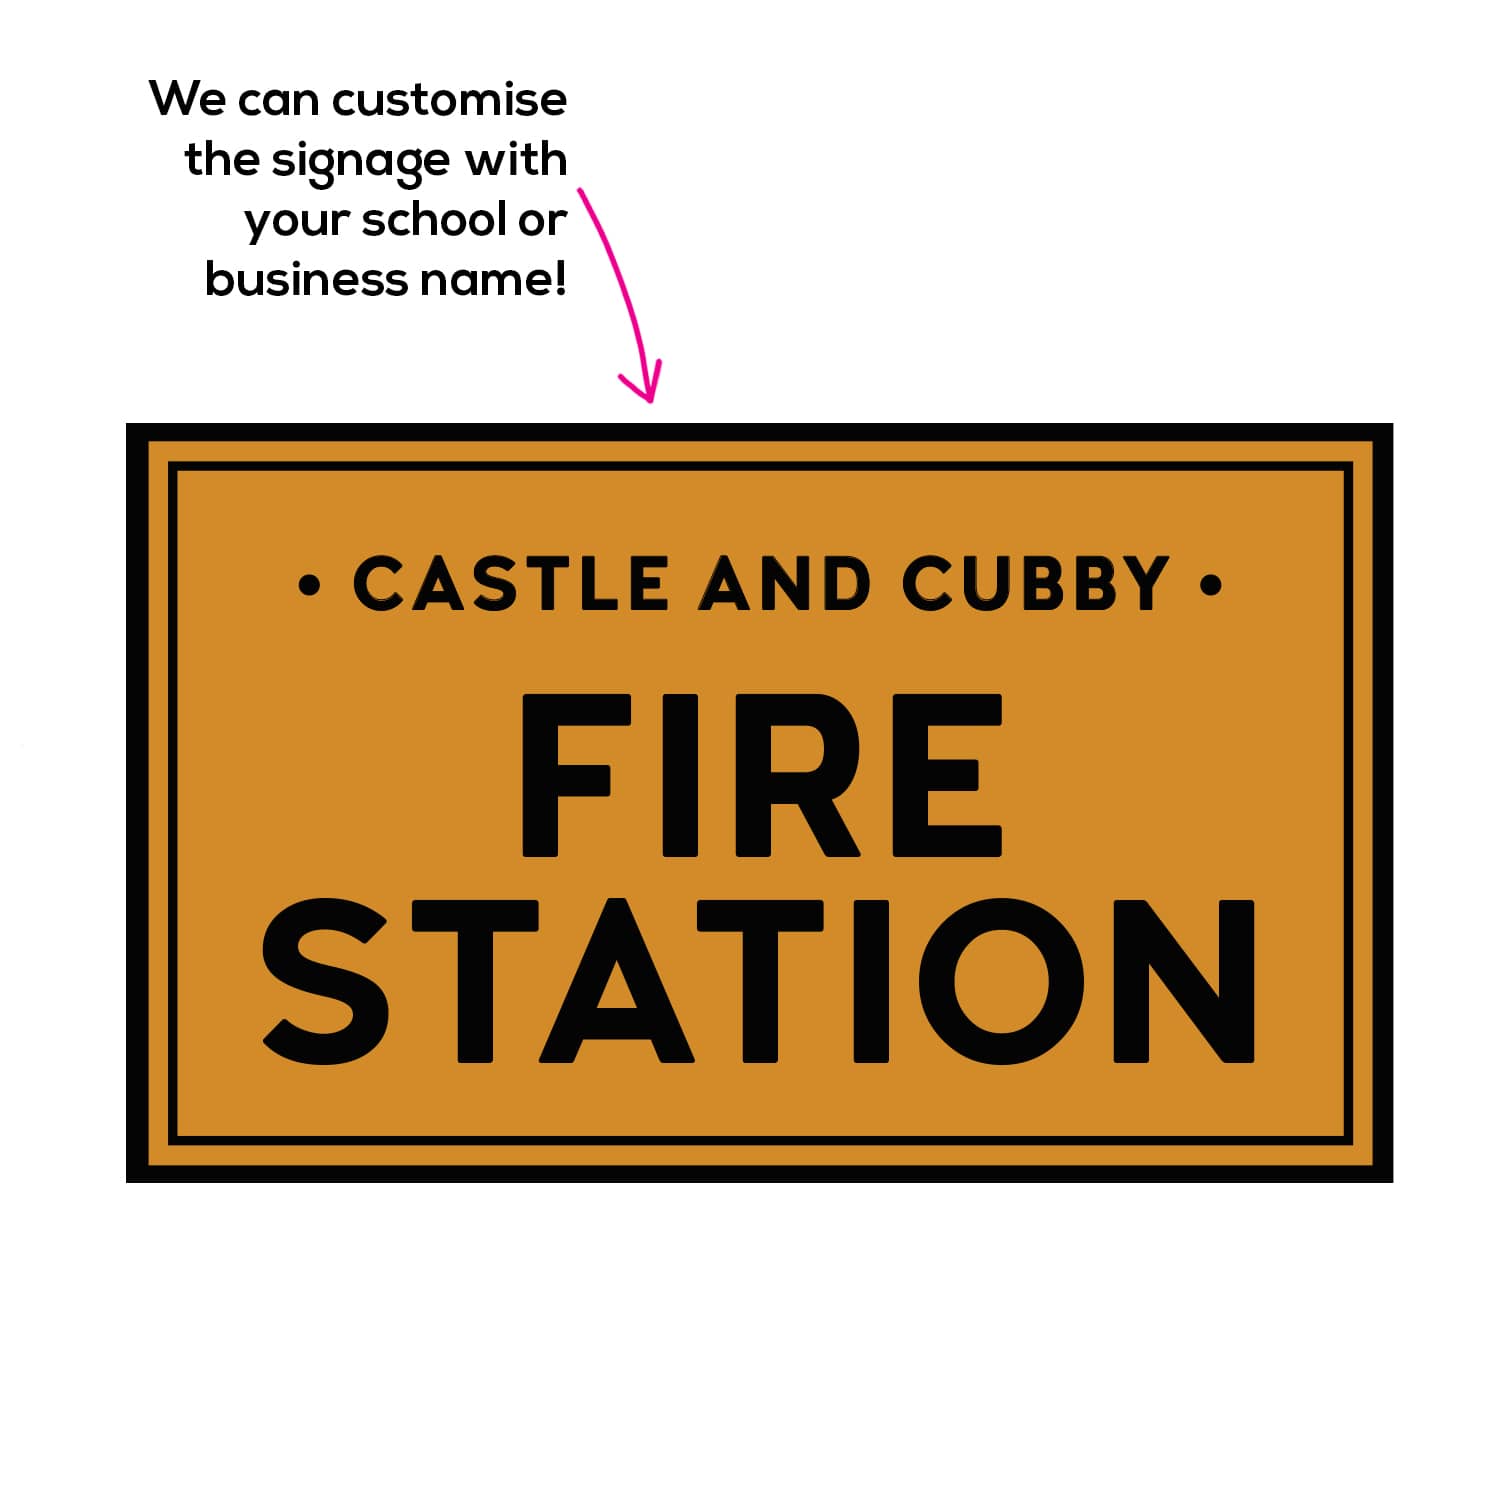 Fire station signage for midi rectangle